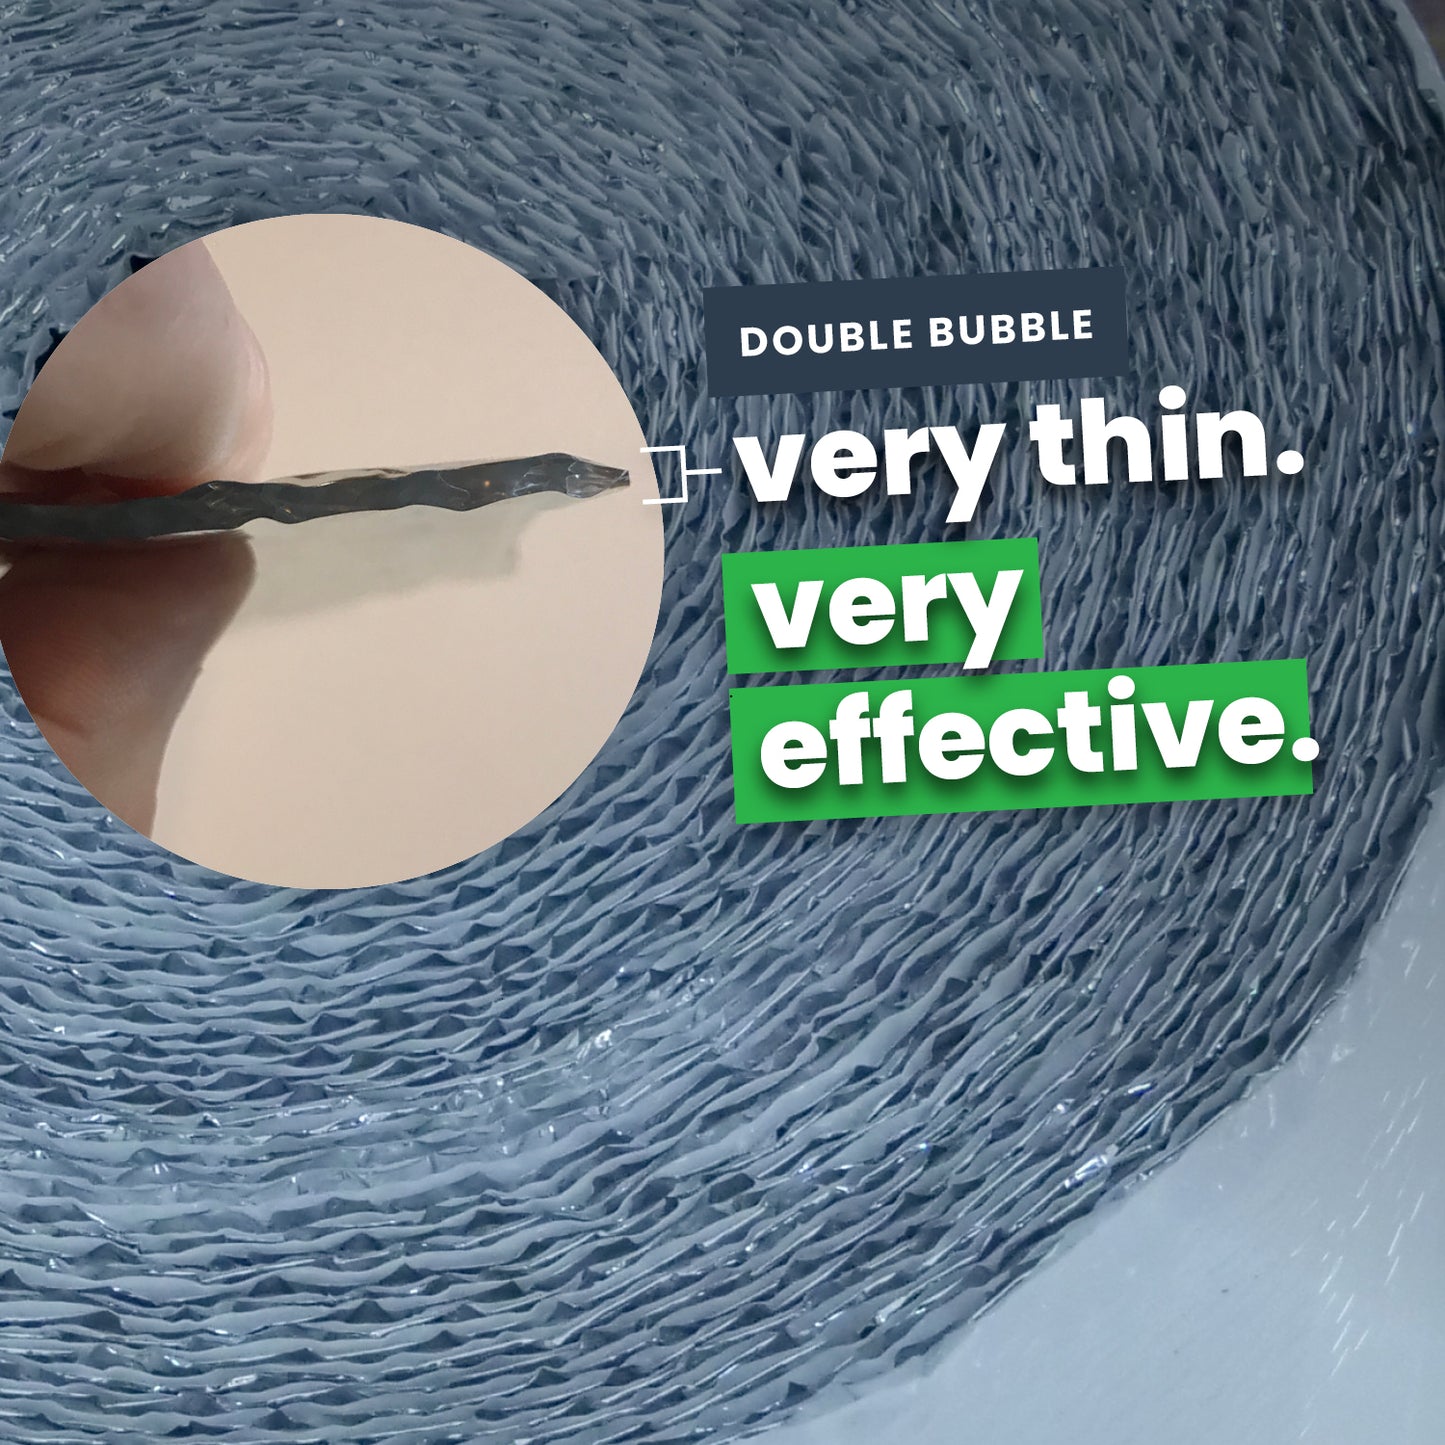 double bubble is very thin and effective